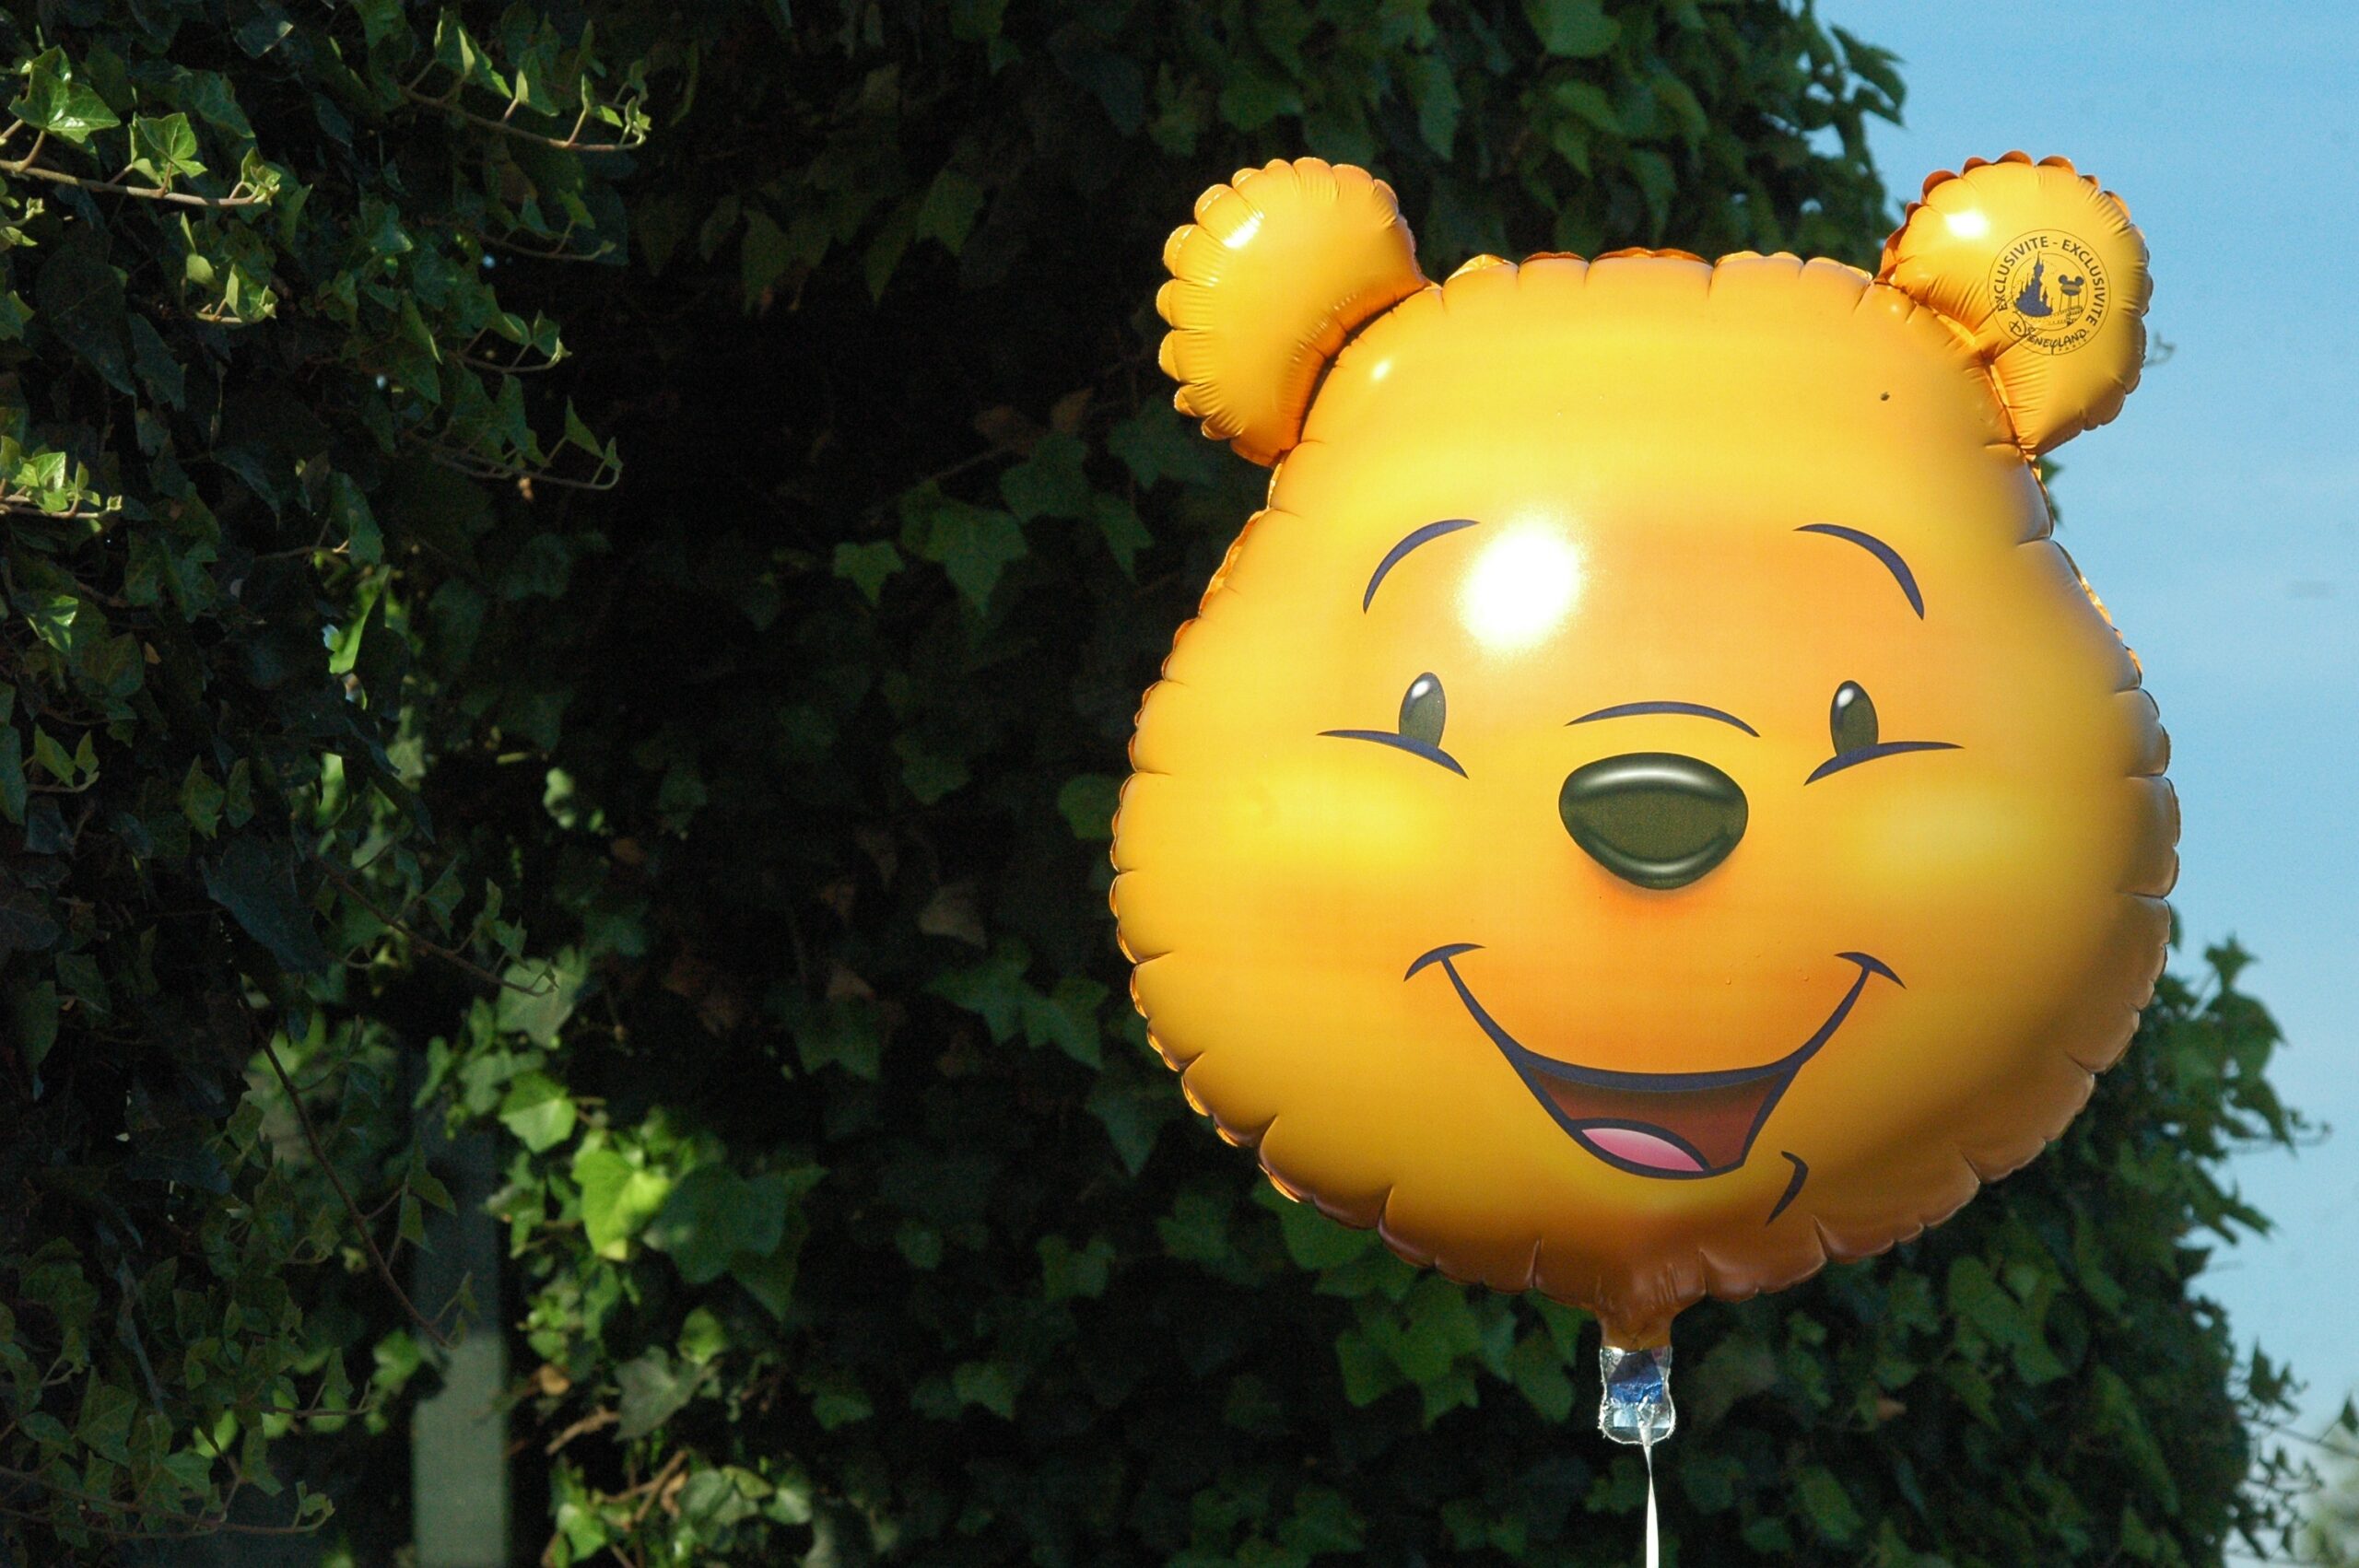 A Winnie the Pooh balloon in front of some leaves